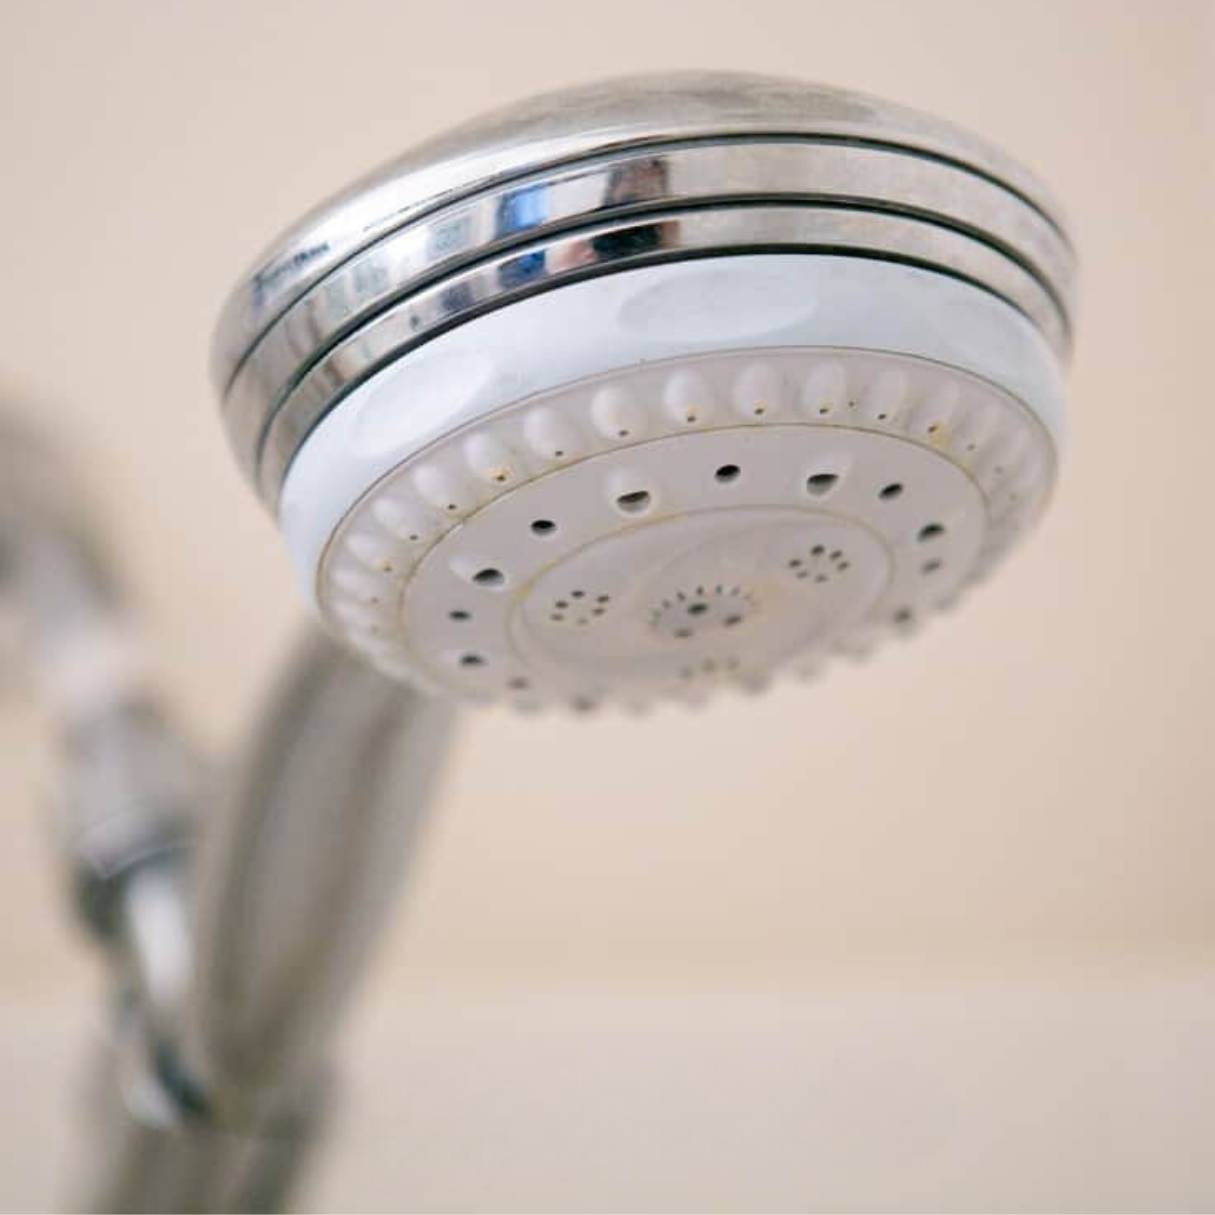 What Is The Black Material On Top Of Your Showerhead